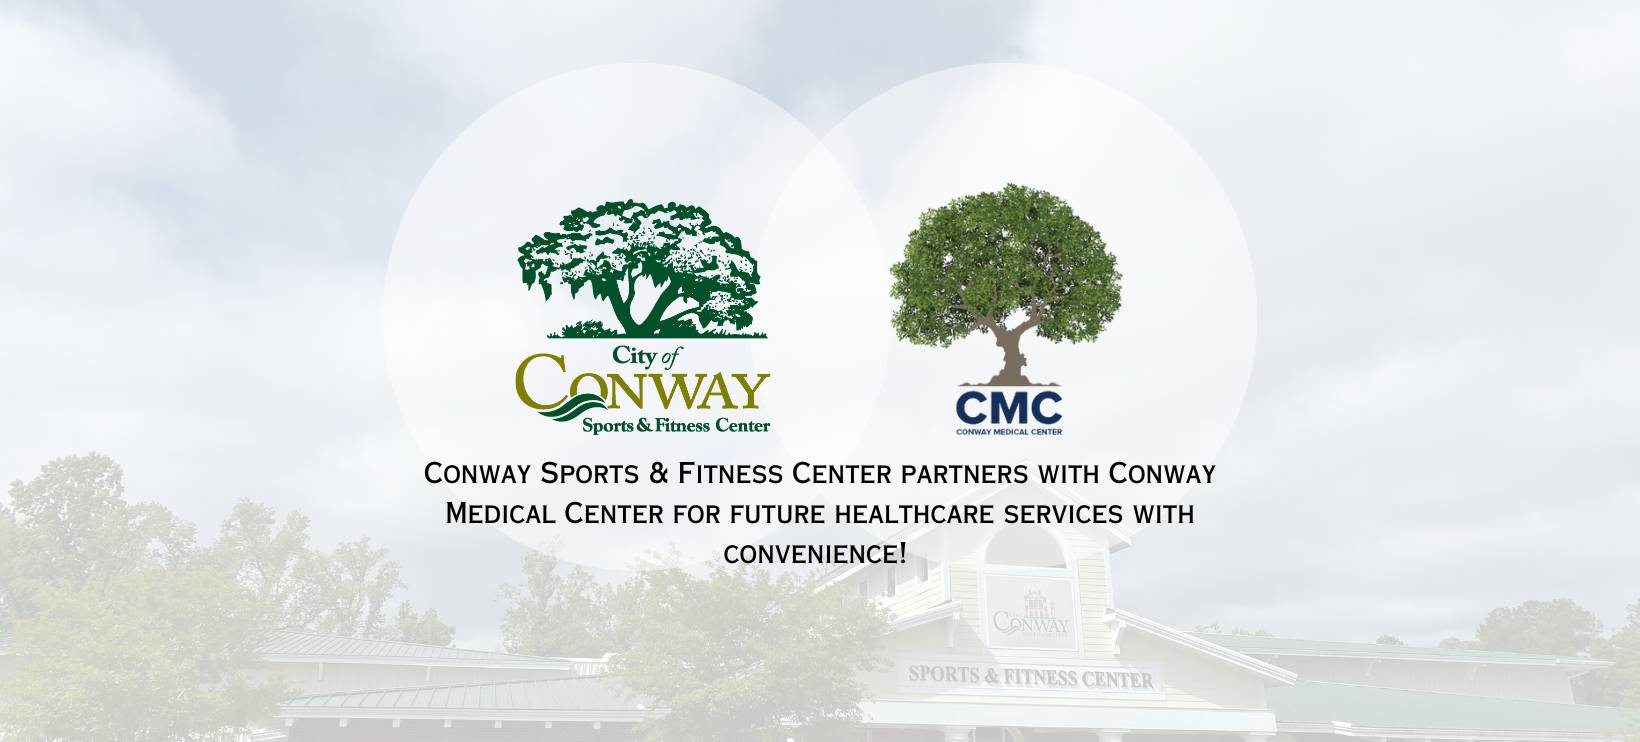 Conway Sports & Fitness Center partners with Conway Medical Center for future healthcare services with convenience!-2 - Copy